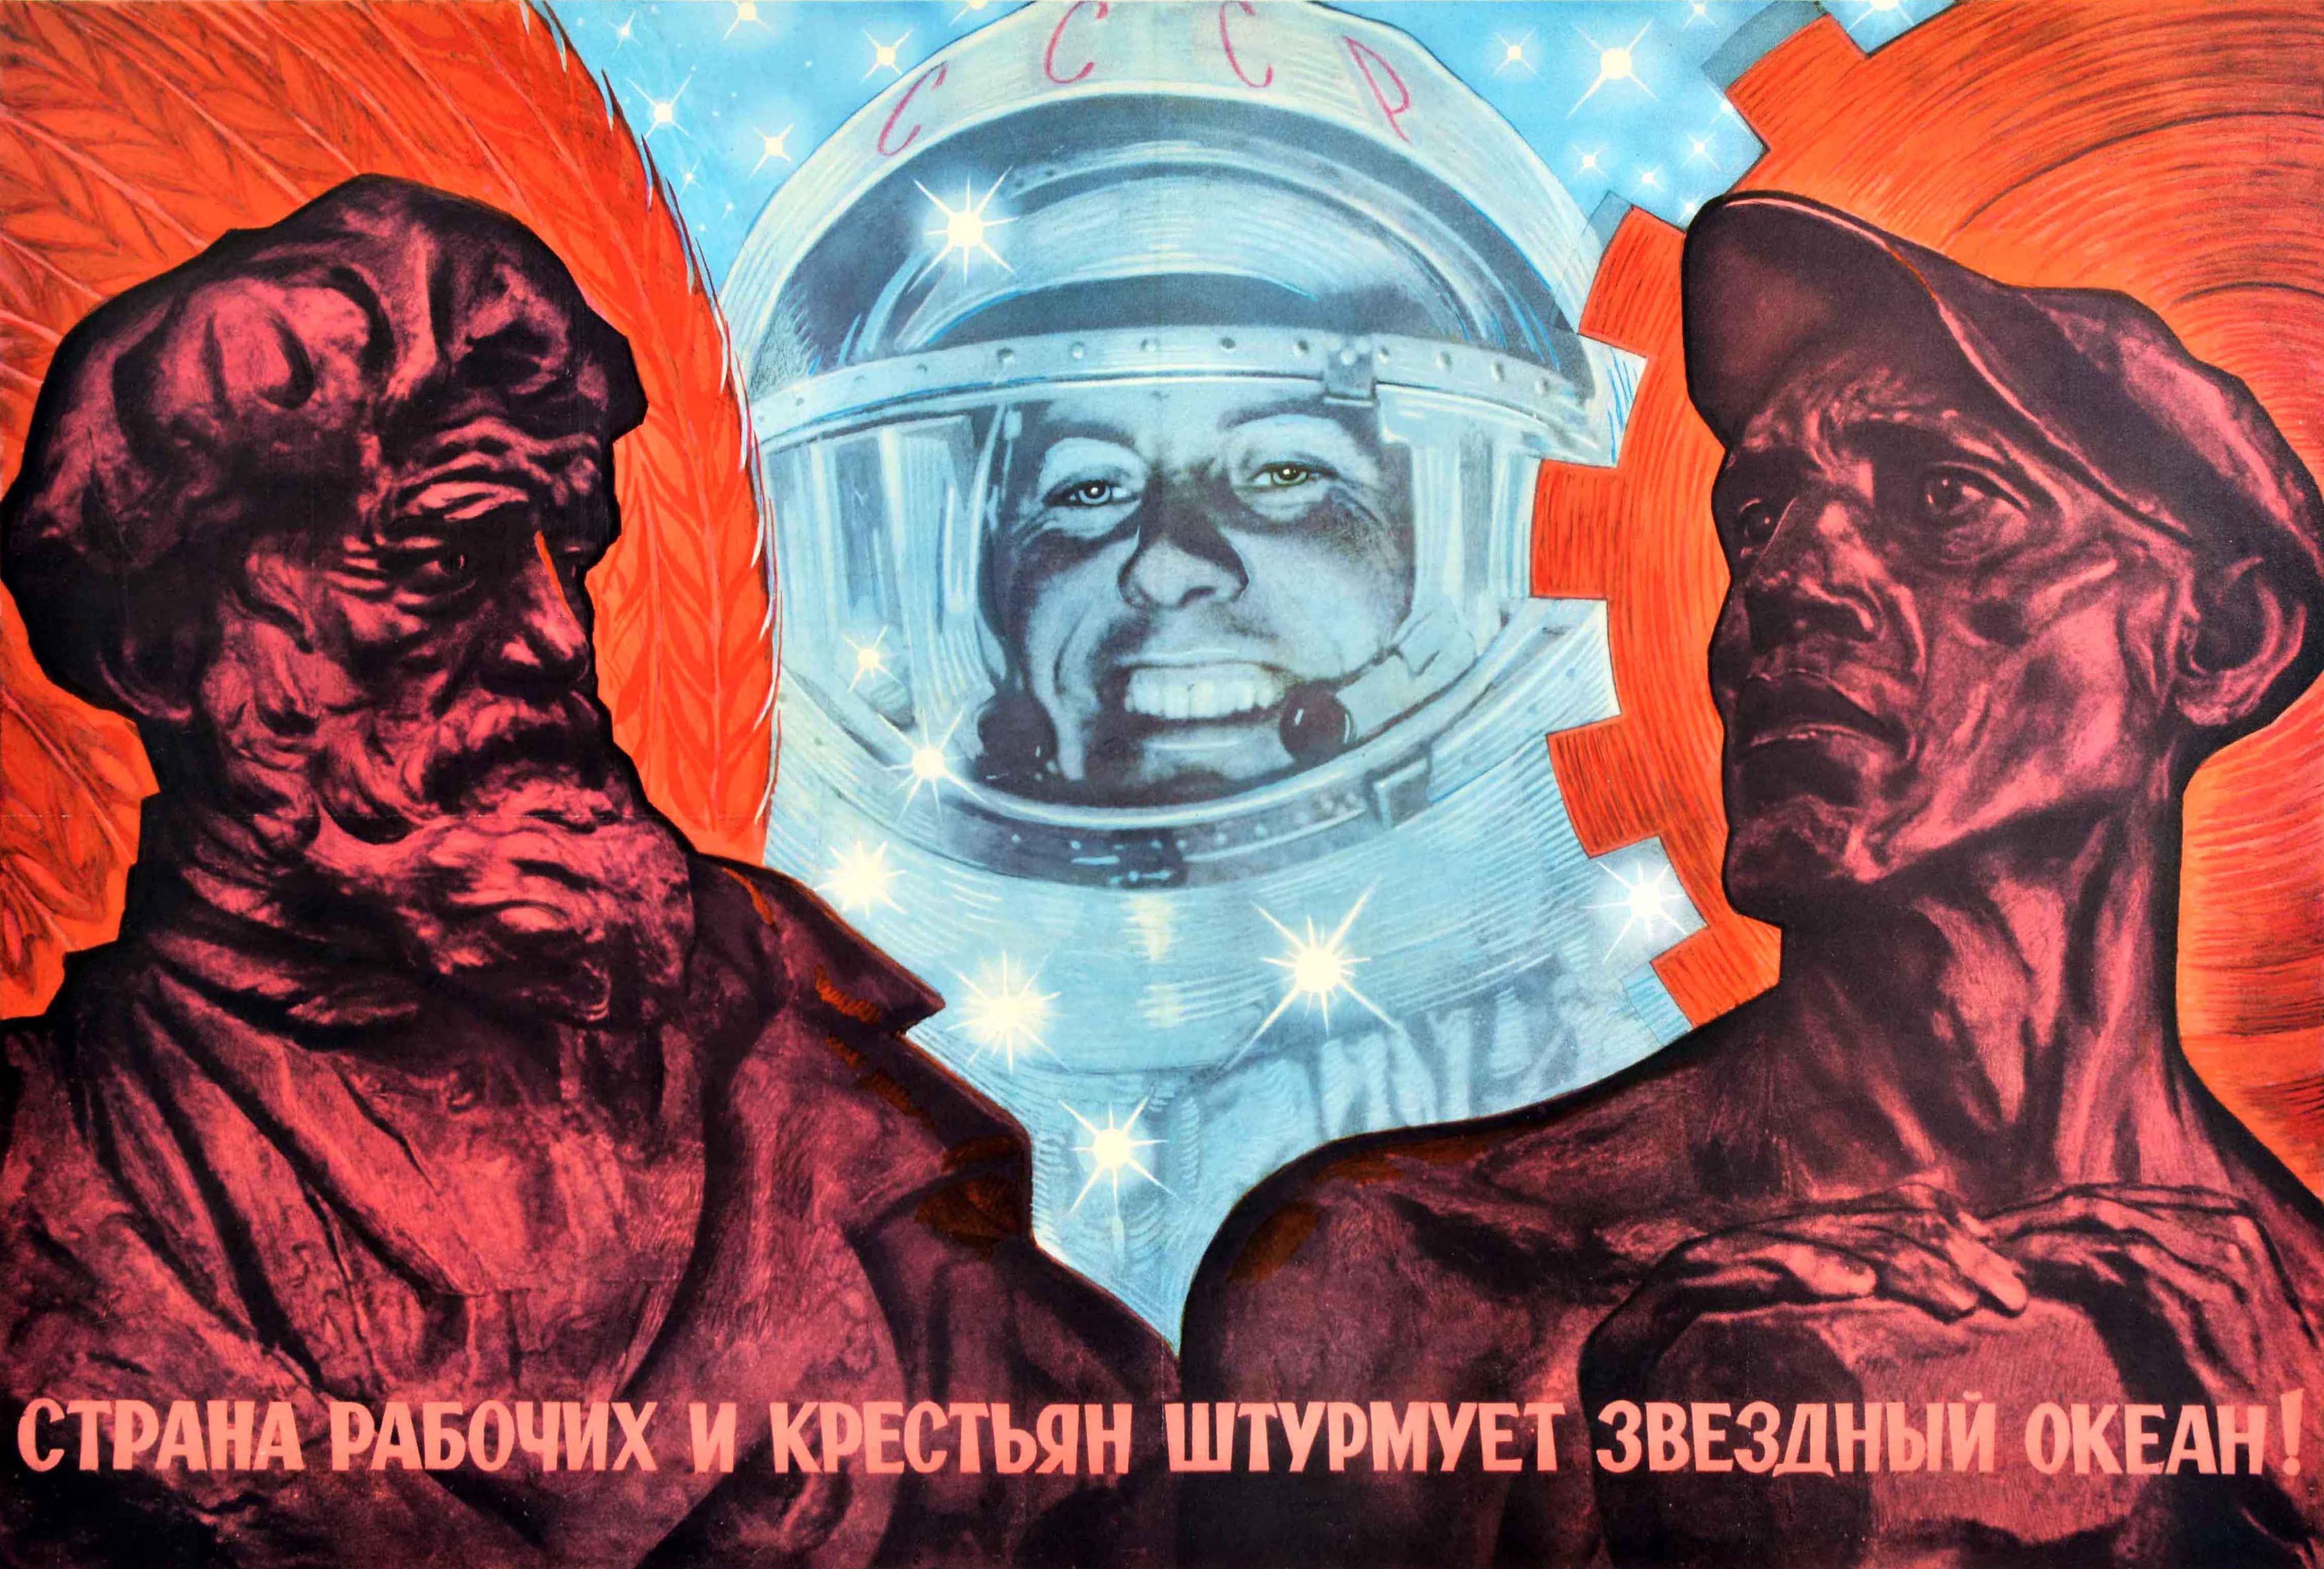 Original vintage Soviet space propaganda poster - The country of workers and peasants is storming the starry ocean / ?????? ??????? ? ???????? ???????? ???????? ?????! Dynamic artwork by the notable Soviet political poster designer Viktor Koretsky